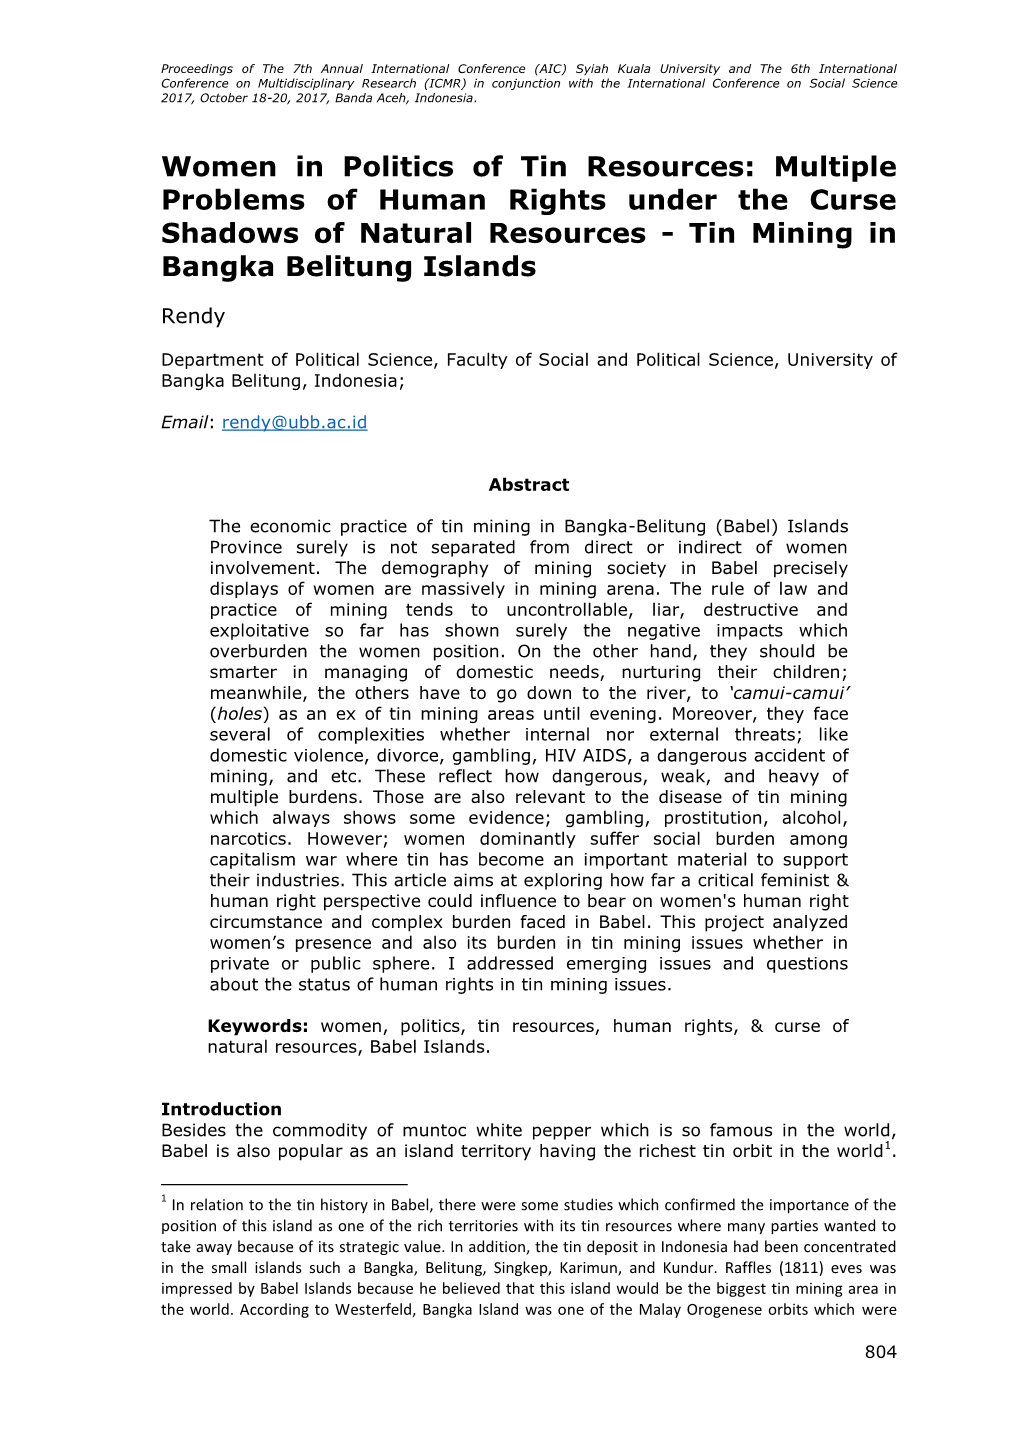 Women in Politics of Tin Resources: Multiple Problems of Human Rights Under the Curse Shadows of Natural Resources - Tin Mining in Bangka Belitung Islands